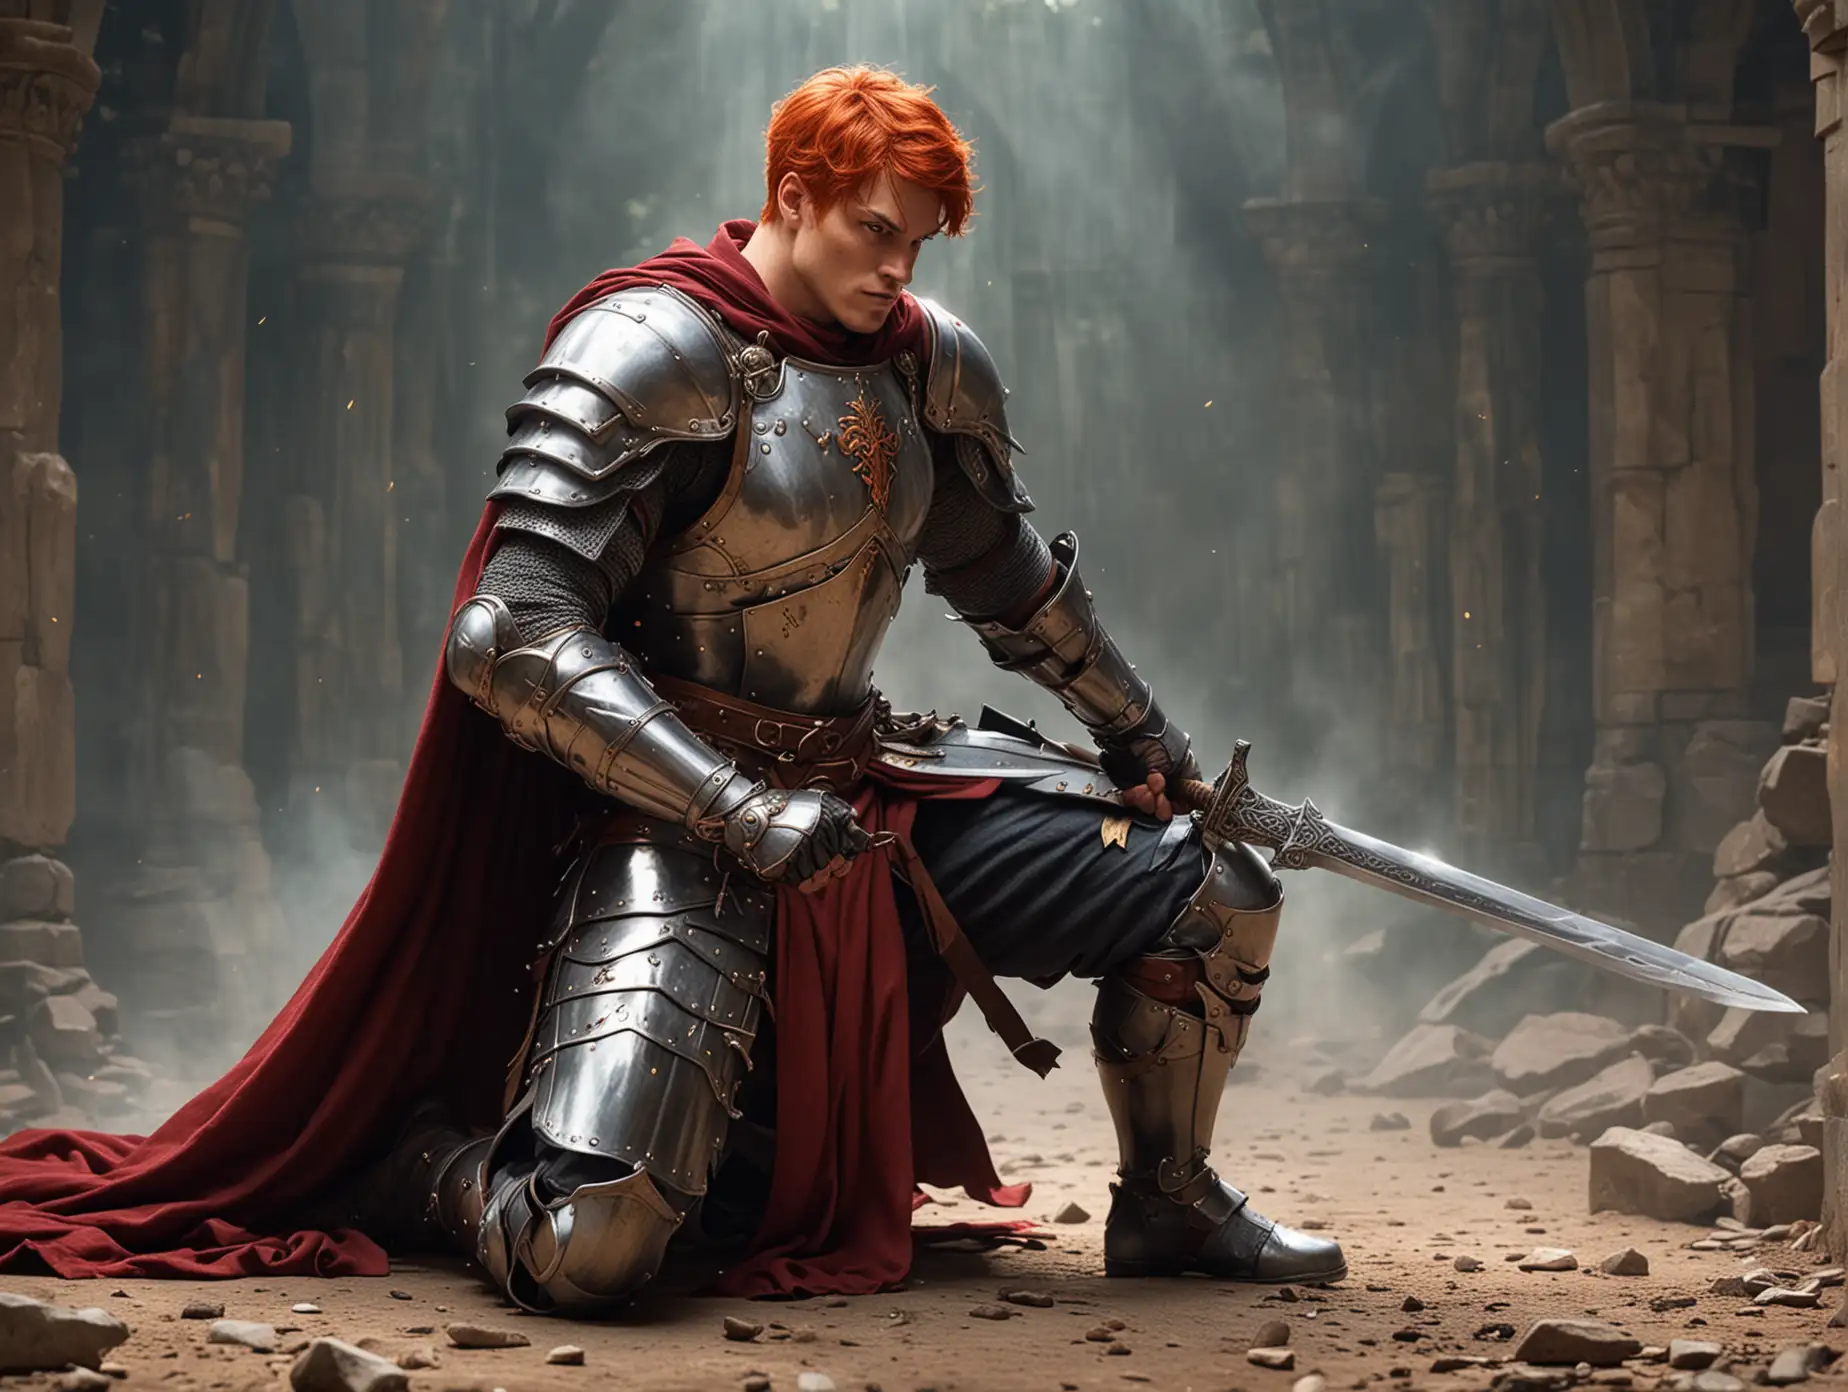 Paladin-Man-with-Short-Red-Hair-Kneeling-with-Sword